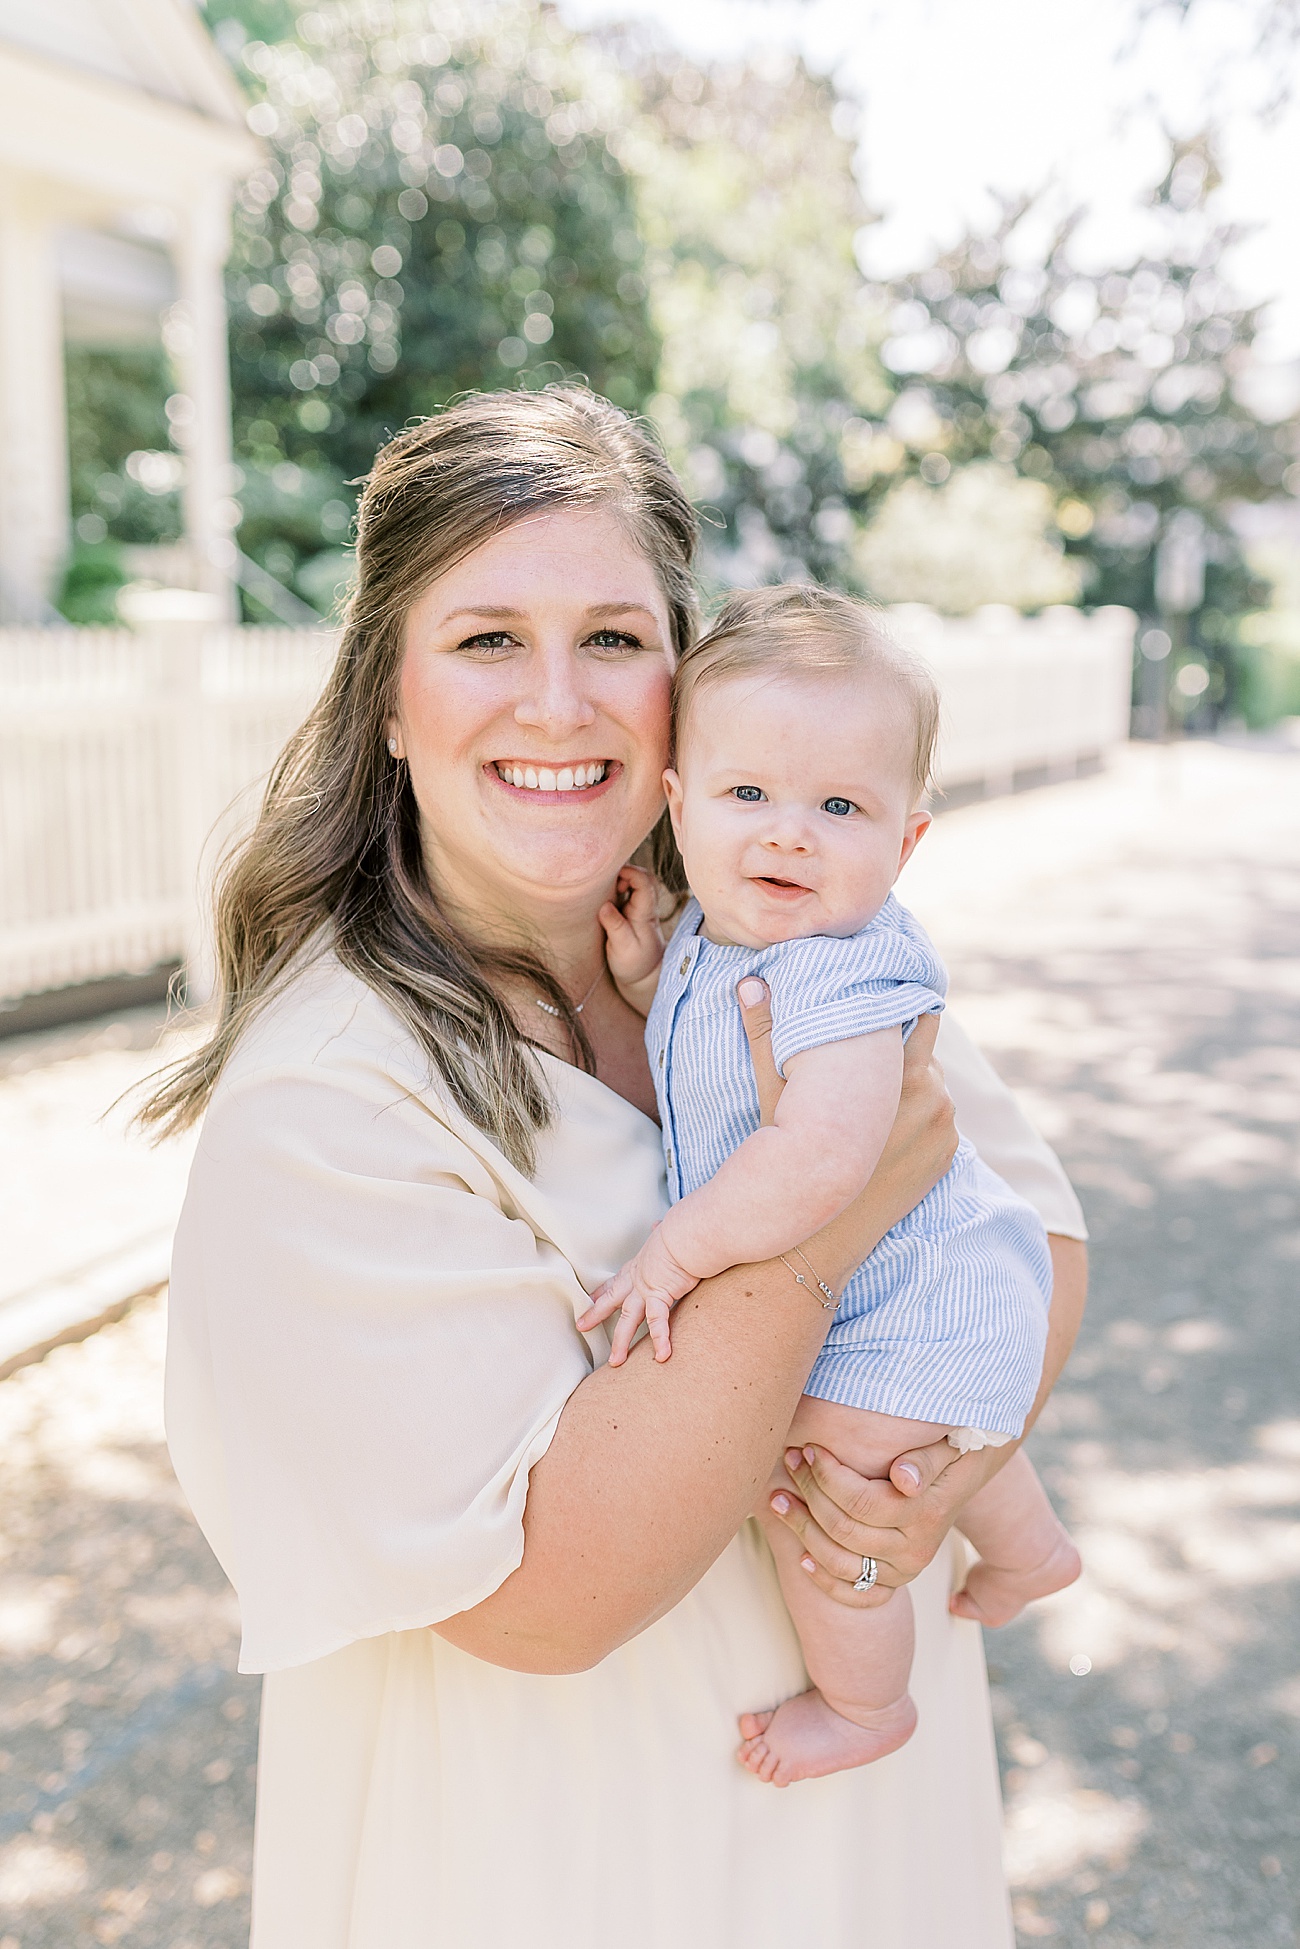 Sweet photo of Mom and baby smiling at camera. Photo by Caitlyn Motycka Photography.